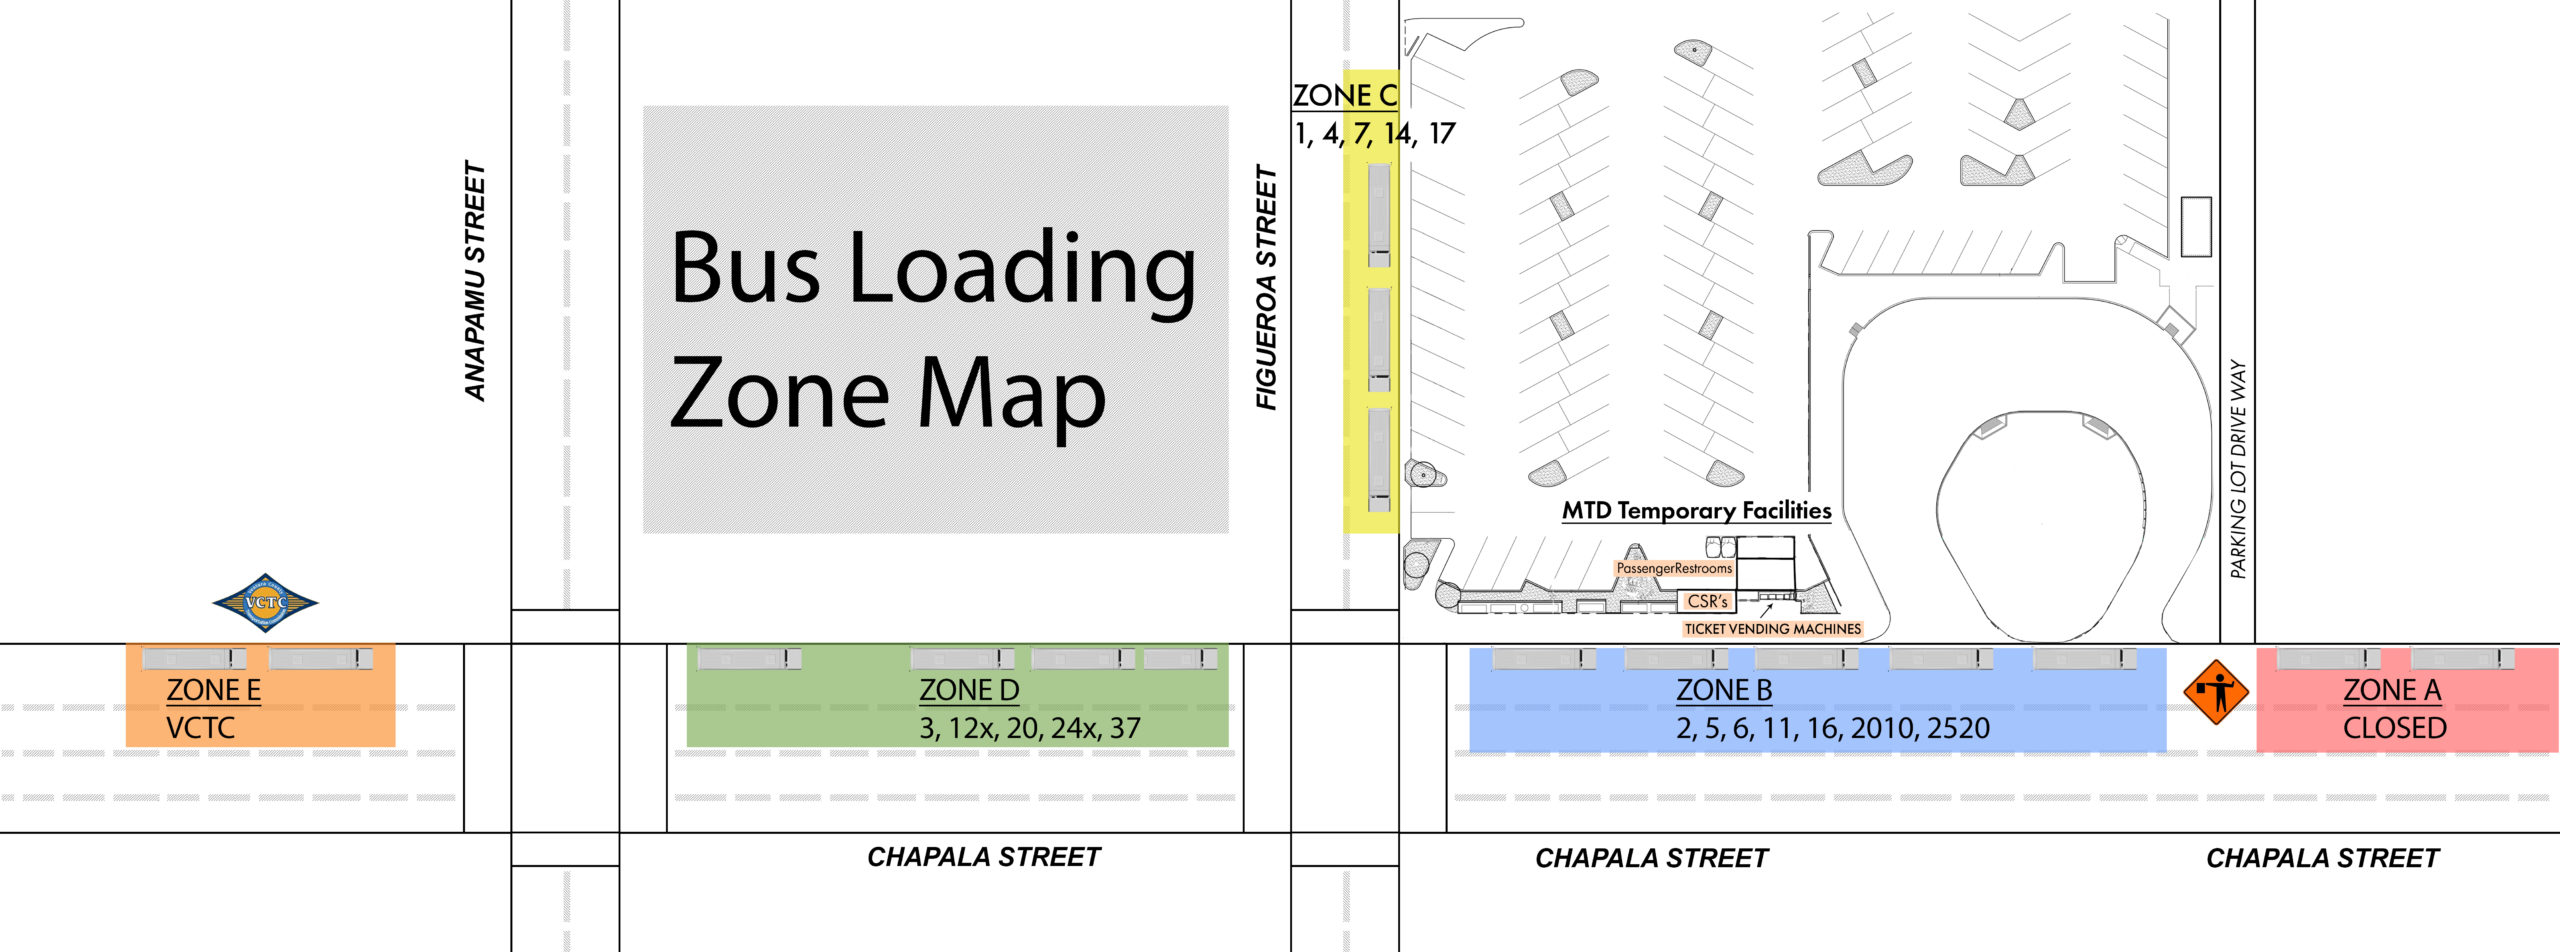 Transit Center Boarding Zones Map- Updated for Zone change